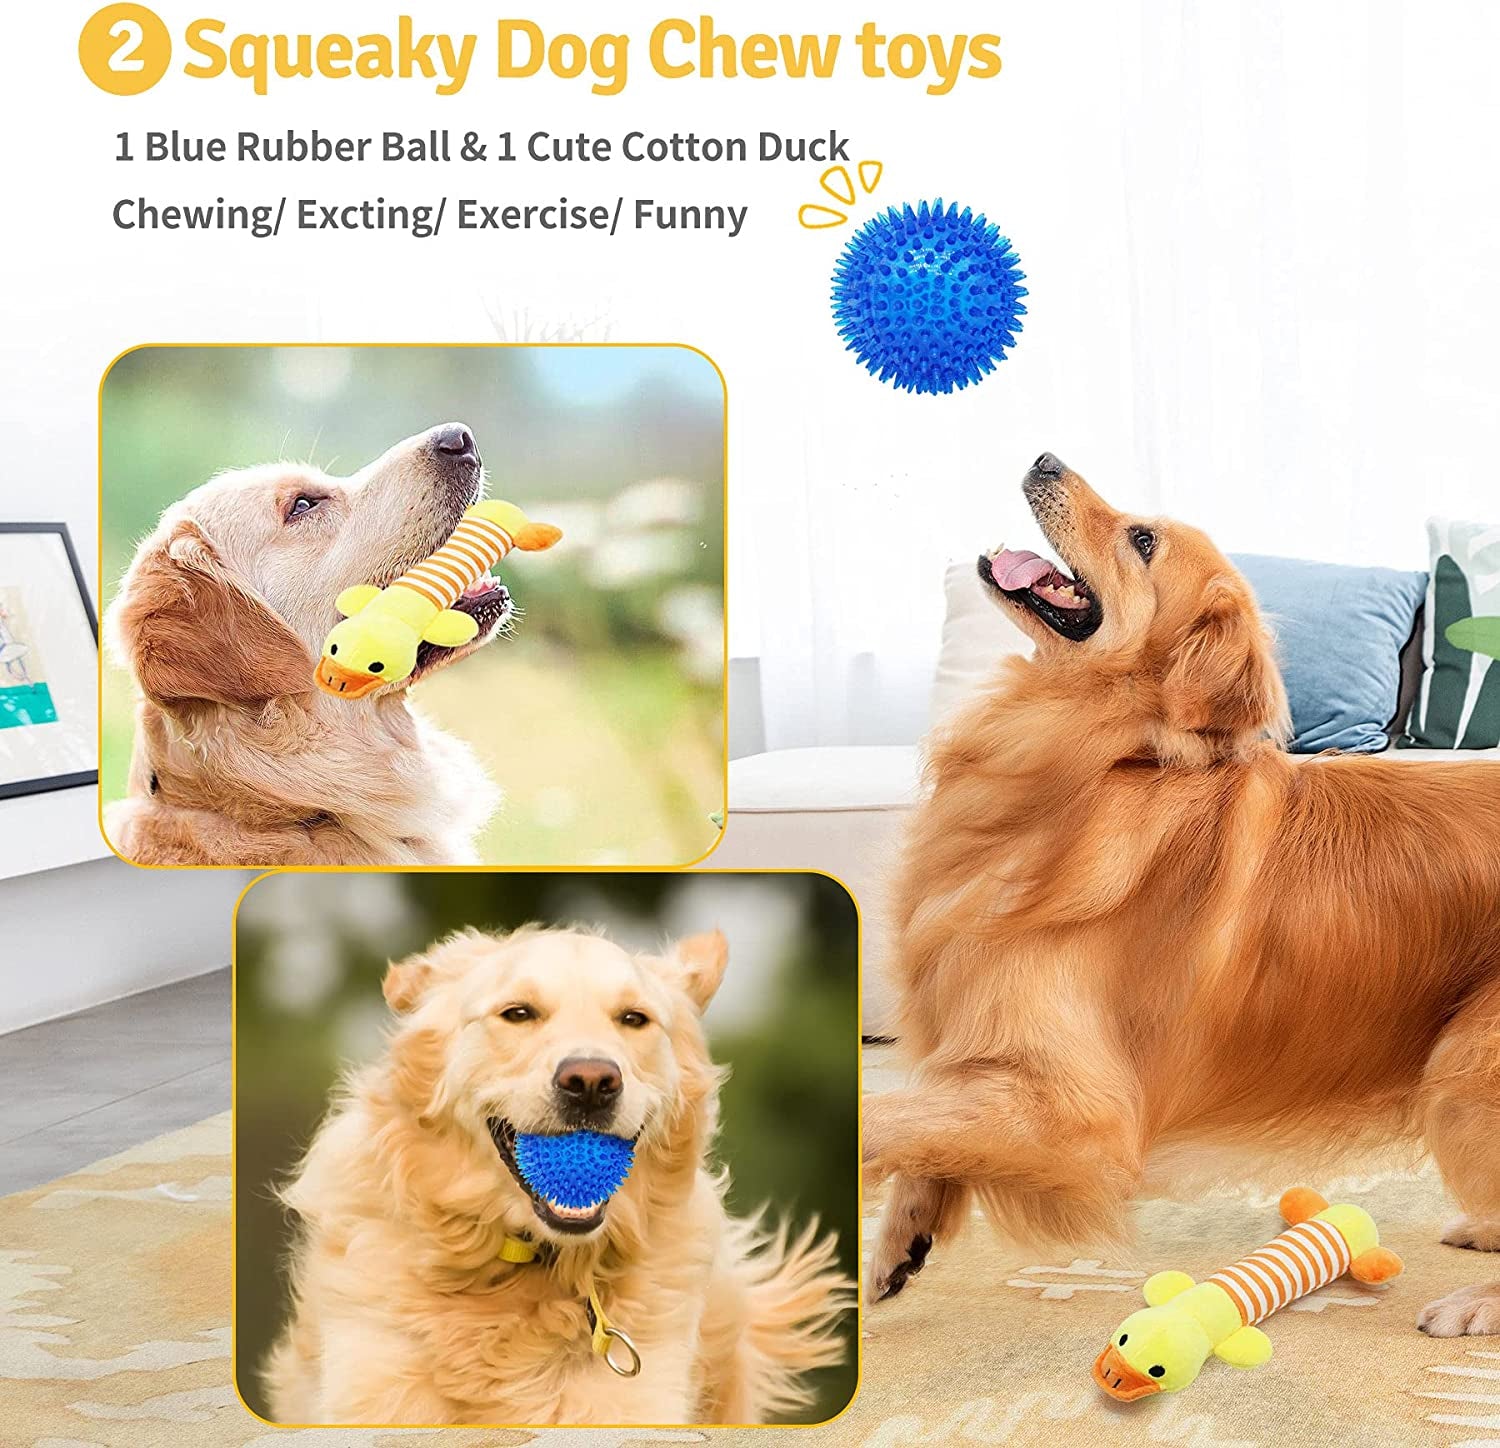 12 Pack Luxury Tough Dogs Toys for Aggressive Chewers 